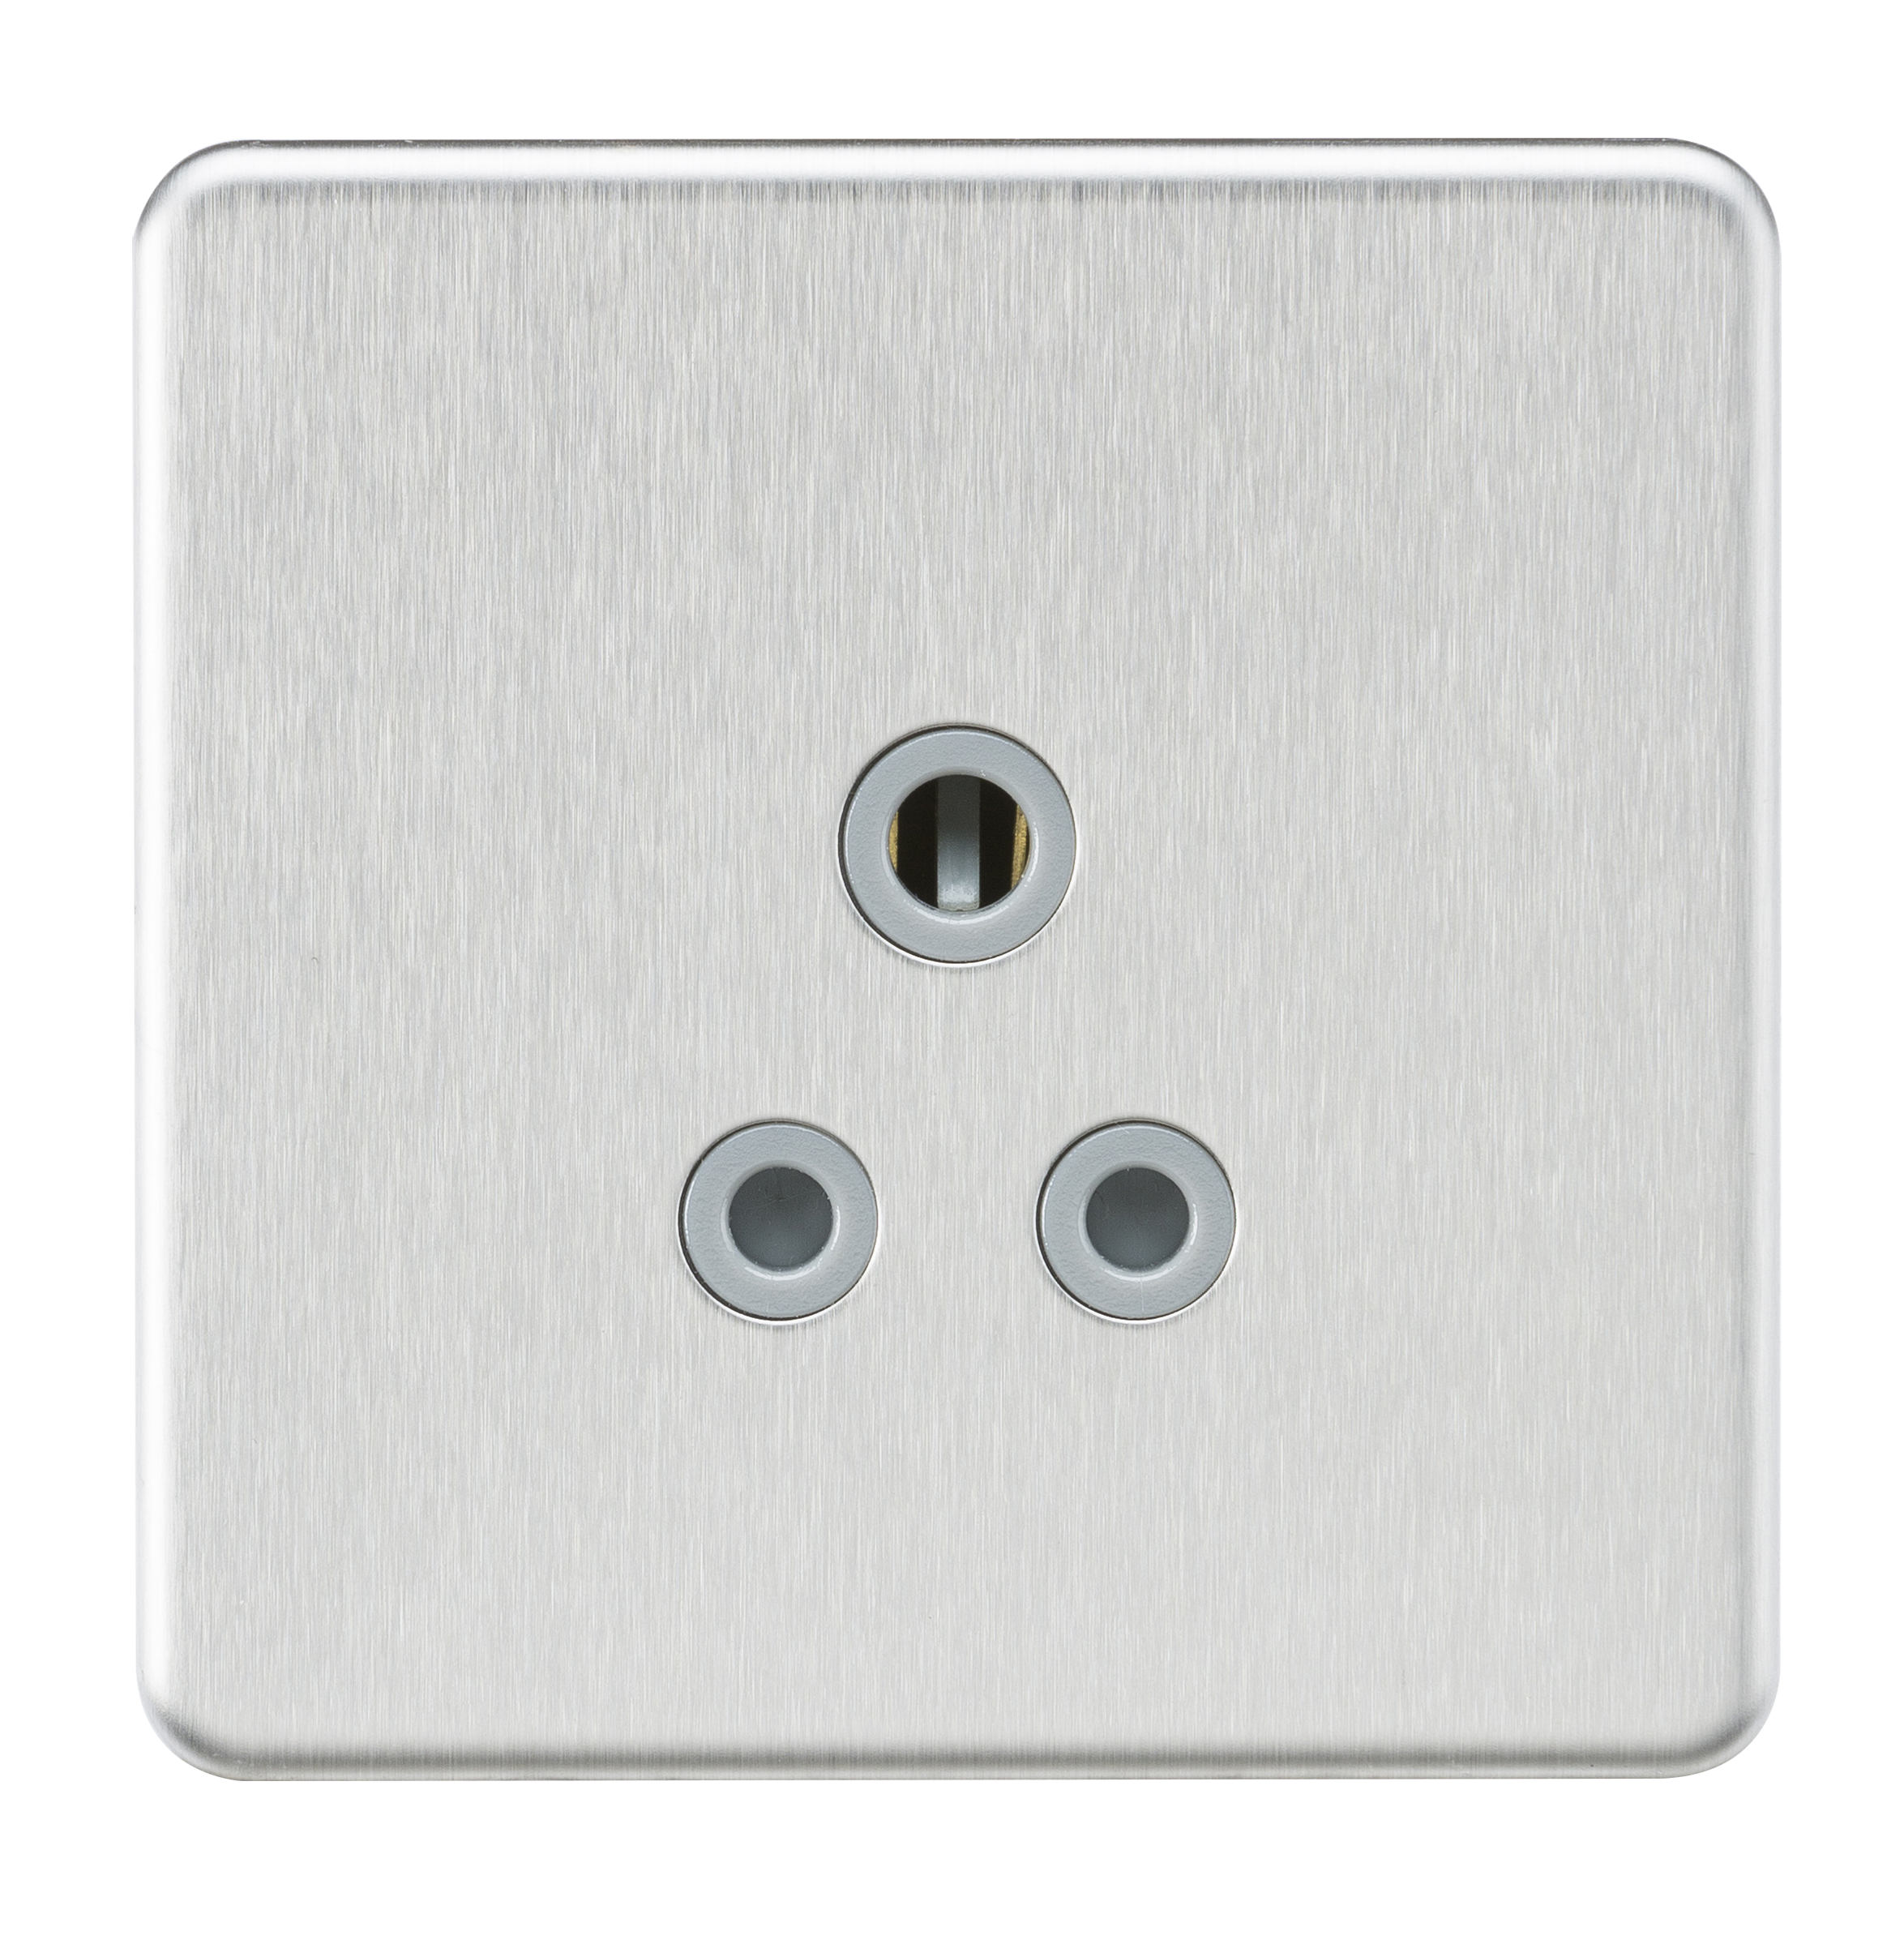 Screwless 5A Unswitched Round Socket - Brushed Chrome With Grey Insert - SF5ABCG 